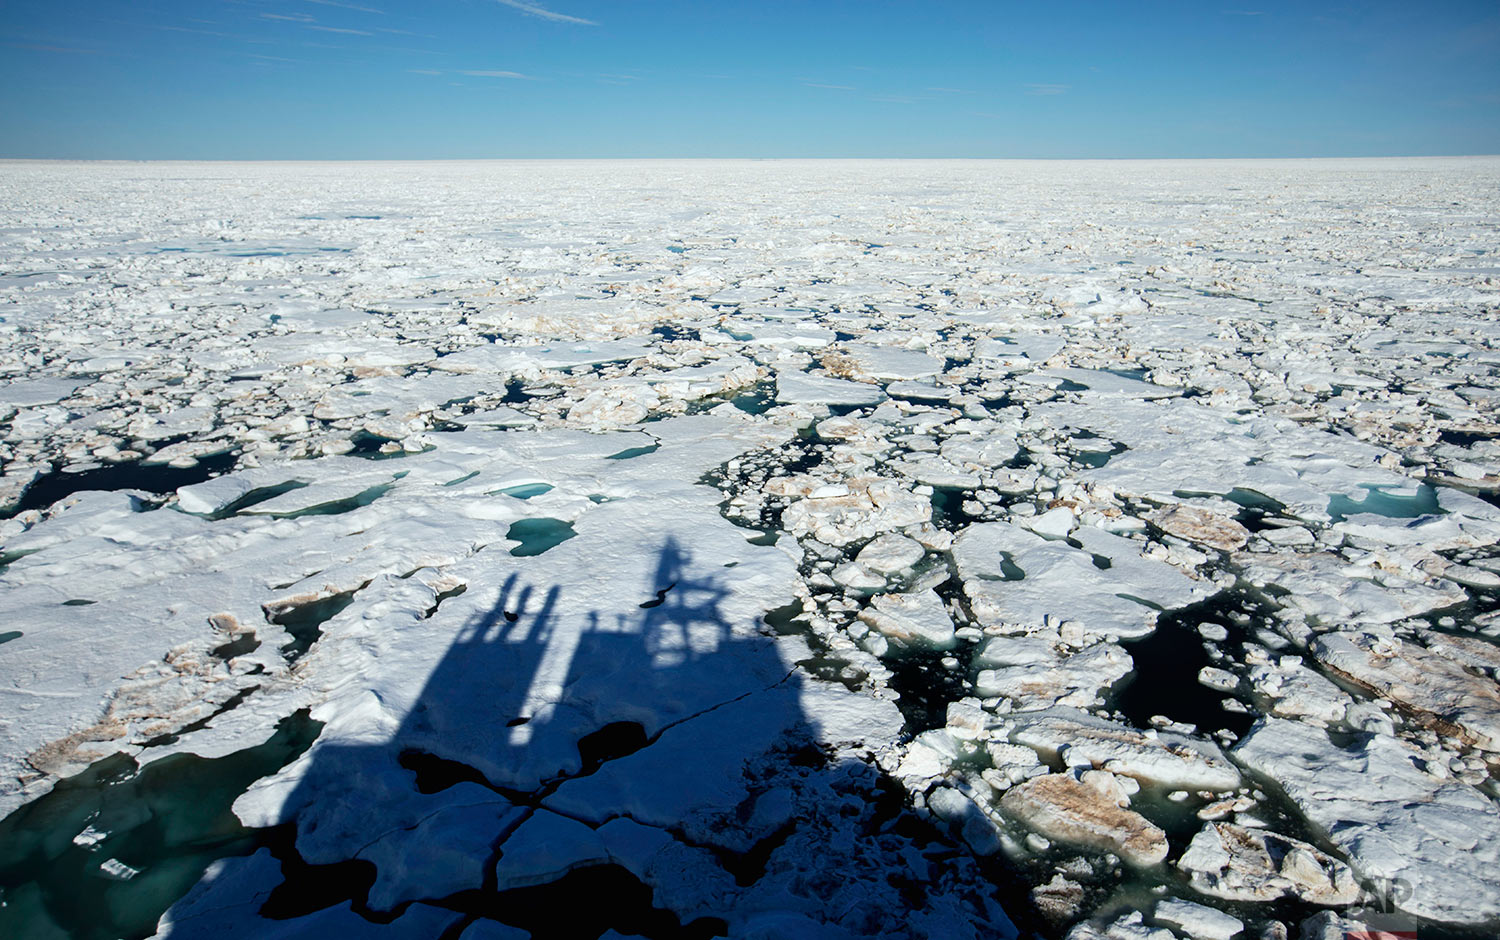  The Finnish icebreaker MSV Nordica casts a shadow on the ice while traversing the Northwest Passage through the Victoria Strait in the Canadian Arctic Archipelago Friday, July 21, 2017. If parts of the planet are becoming like a furnace because of g